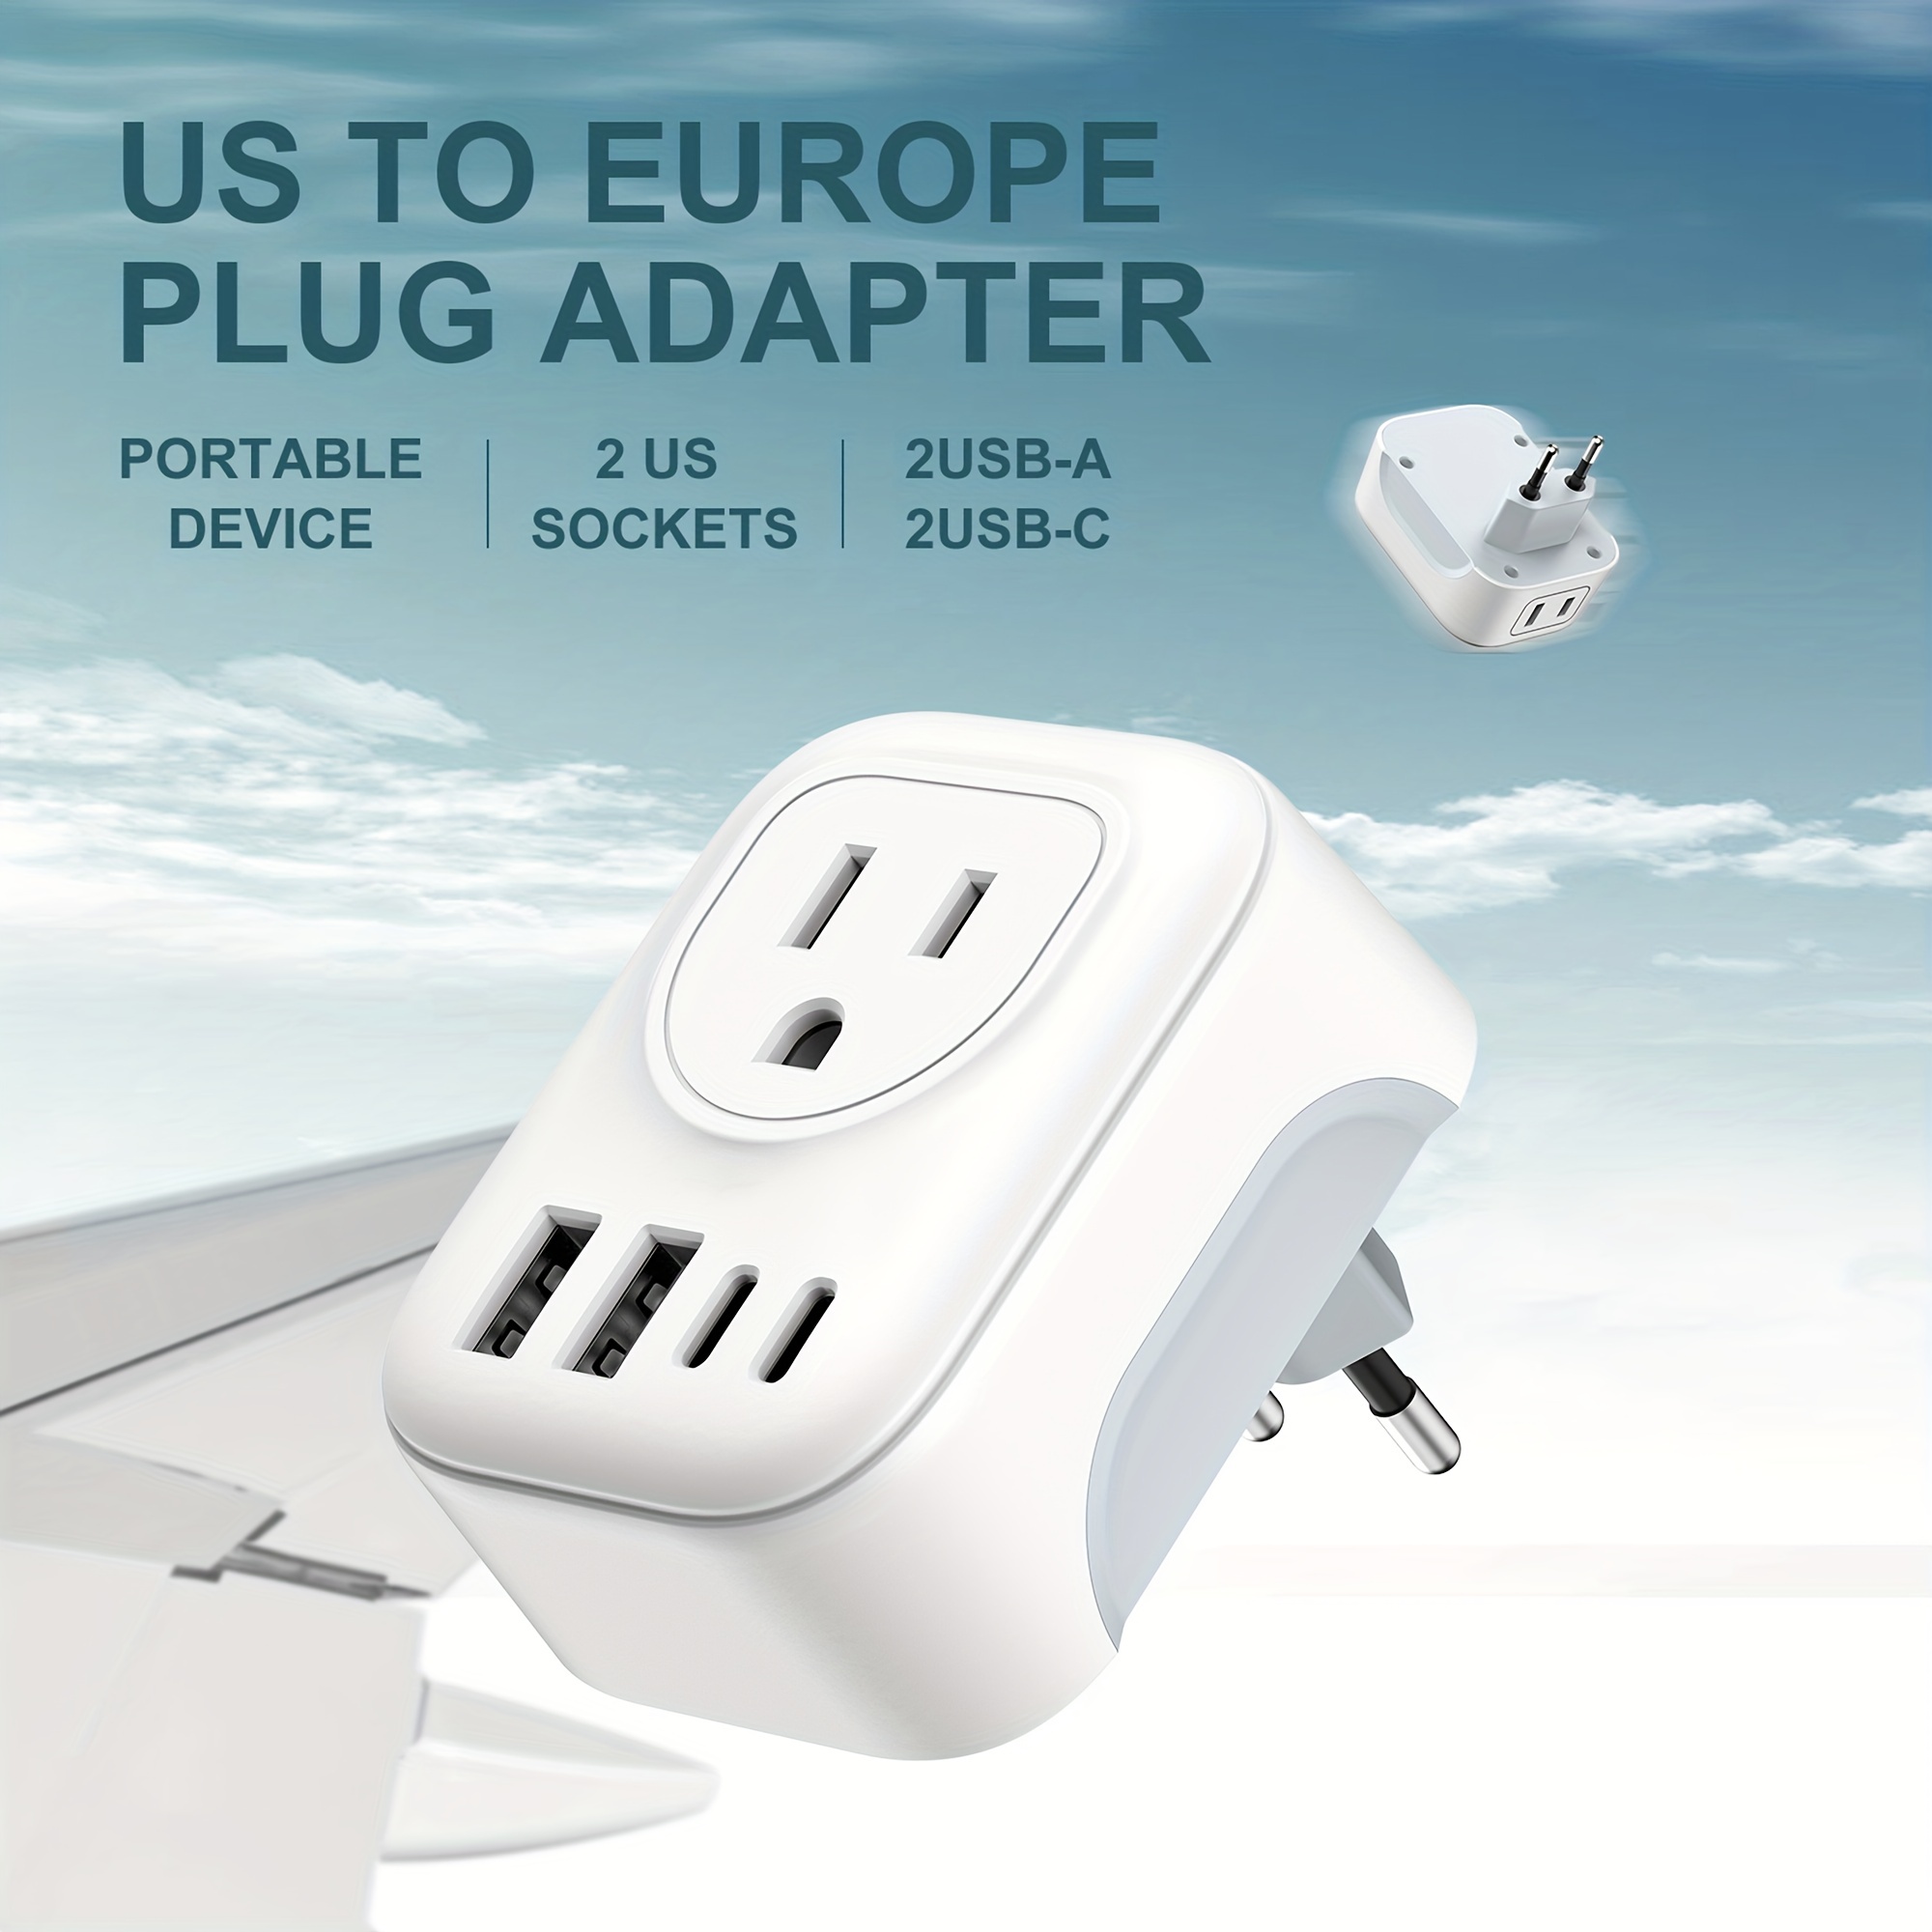 World-Way 6 Travel Adapter Kit | 2 USB + 2 US Outlets - Grounded